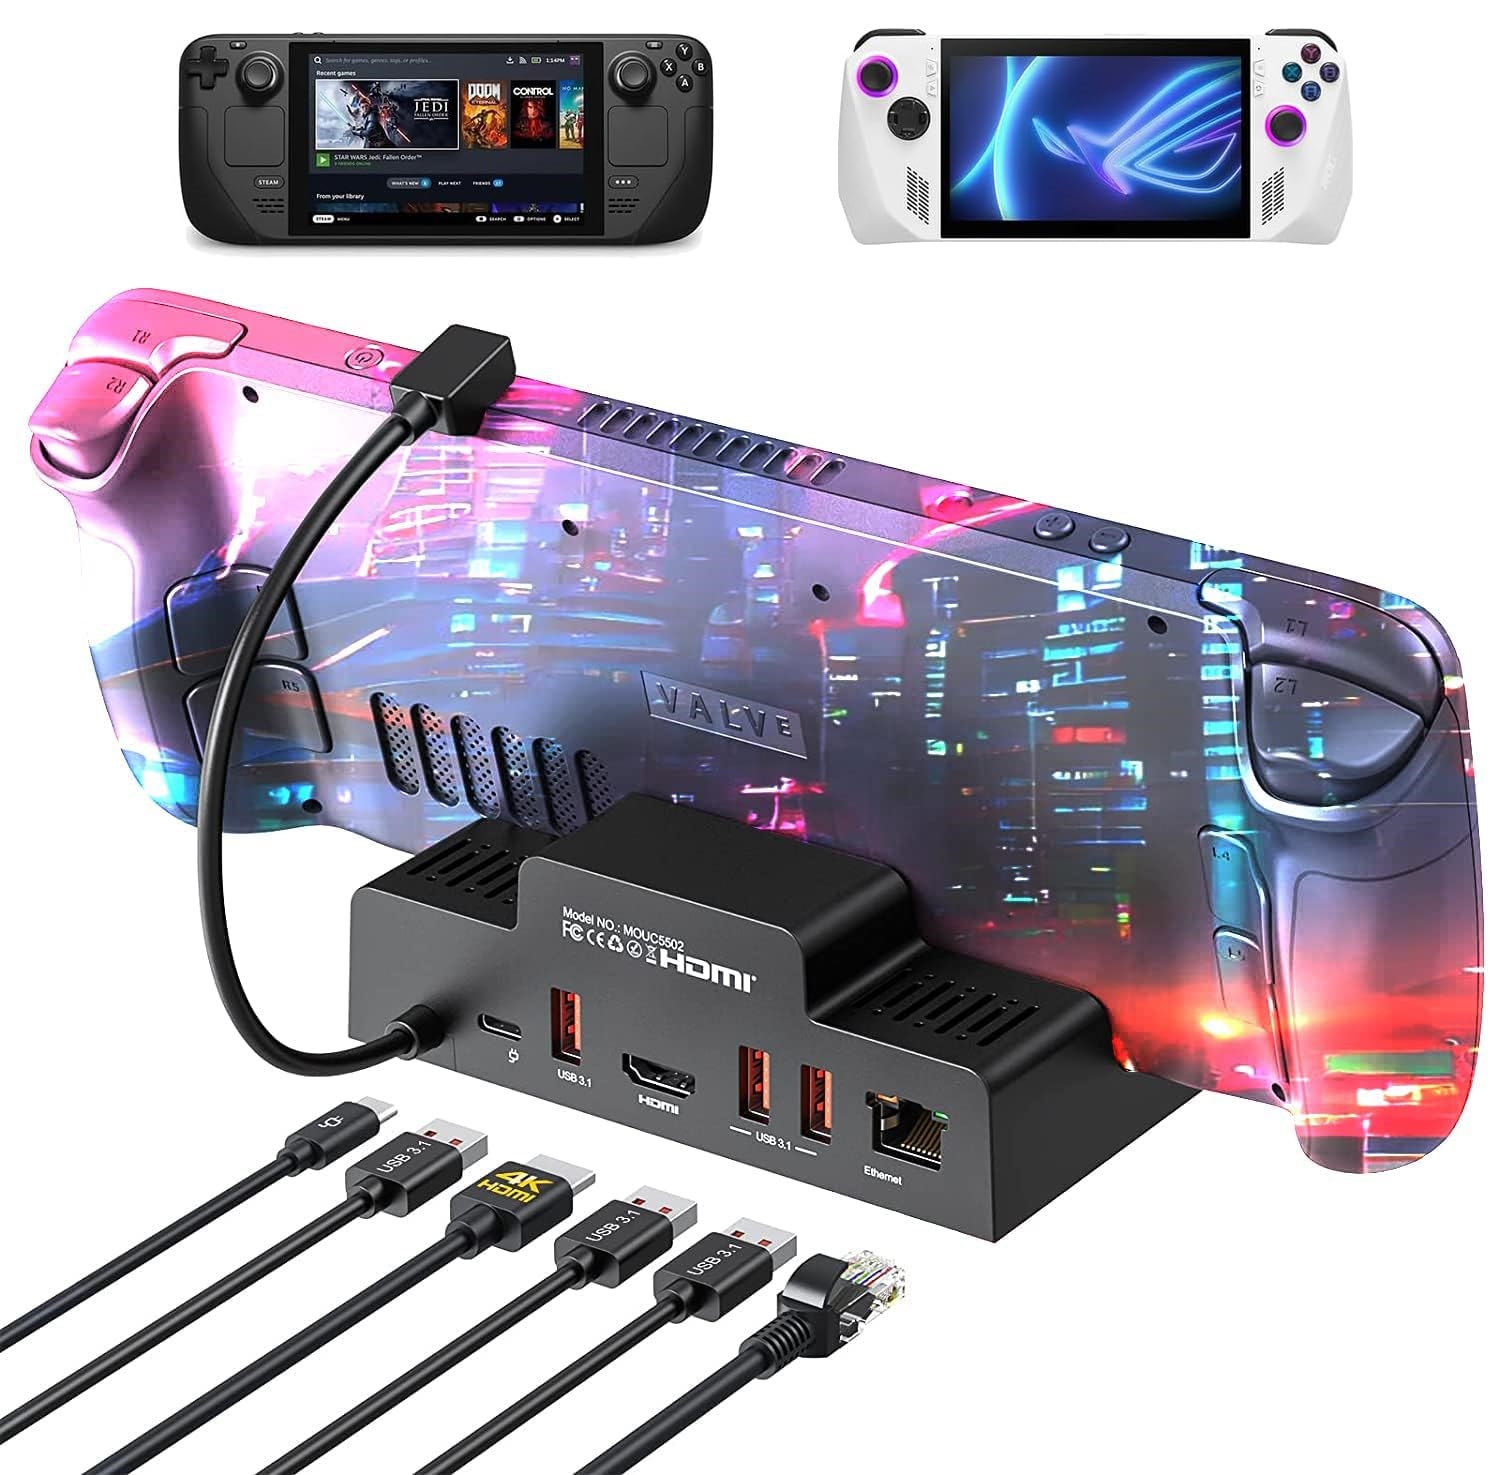 3-in-1 65W GaN Gaming Charger Dock With 4K@60 USB2.0 Ports for Steam Deck ROG  Ally Support ROG Ally 30W Turbo Mode – Miraboxbuy